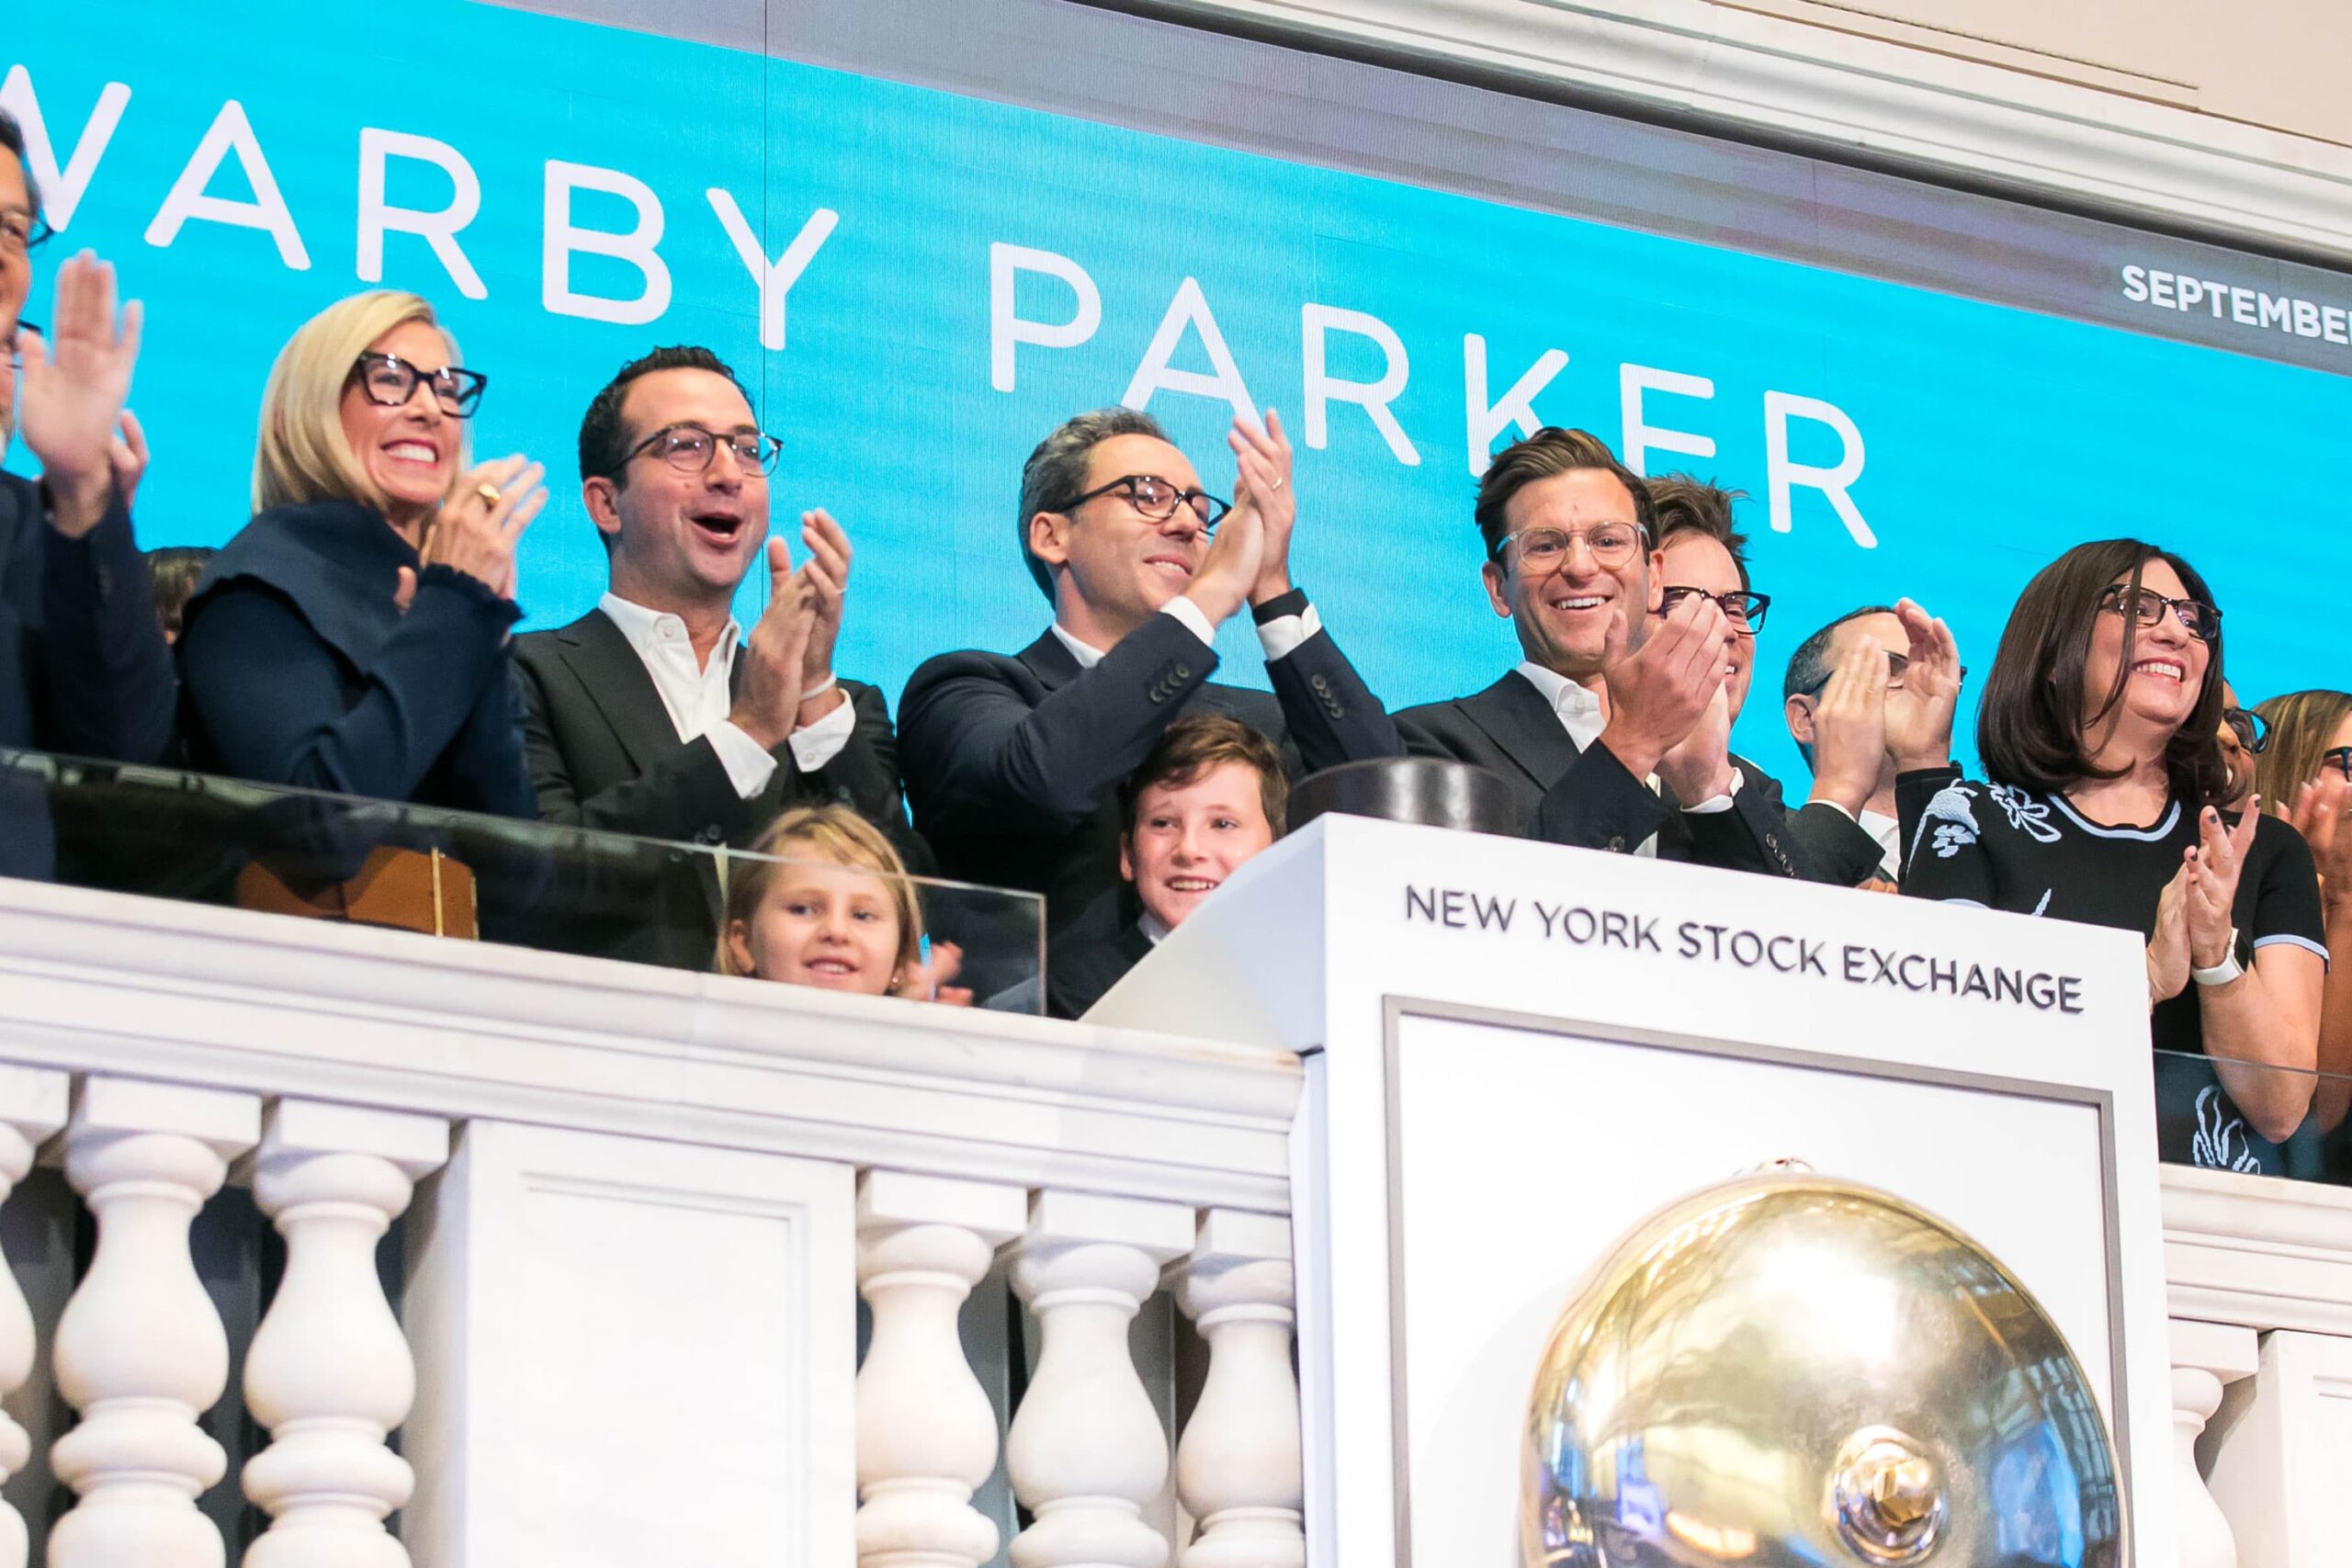 Warby Parker soared in its market debut, setting a high bar for online retailers